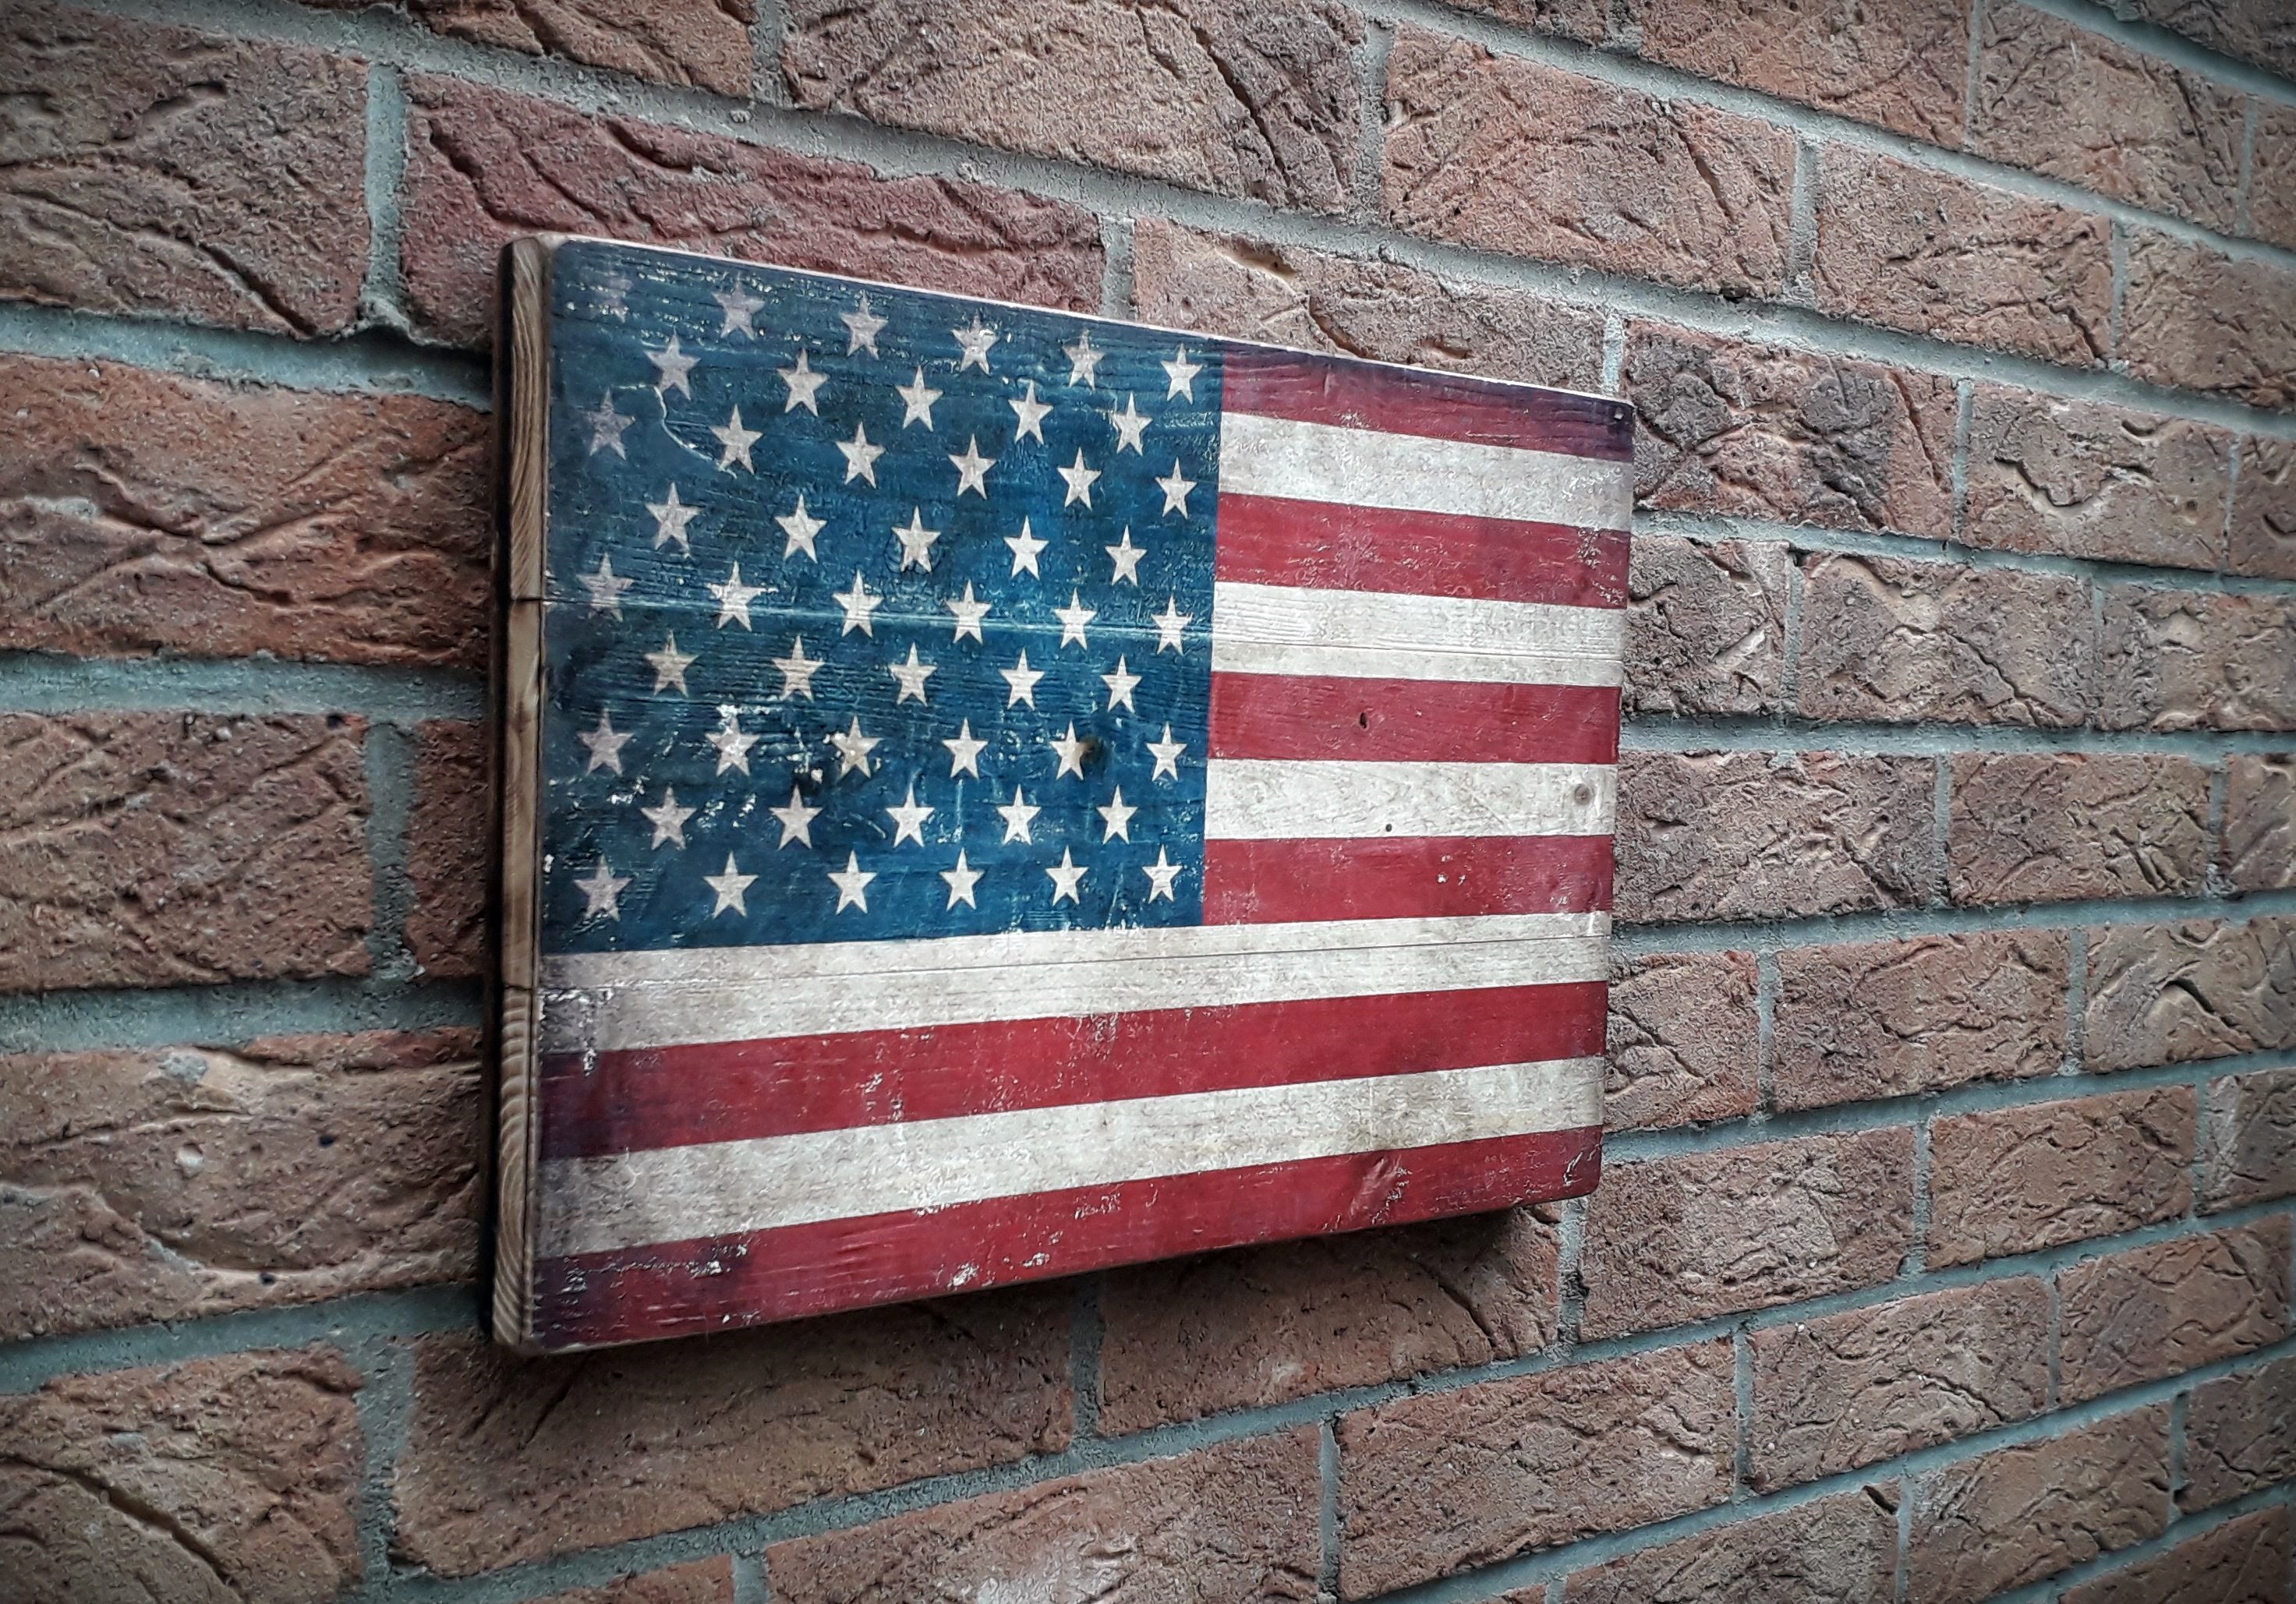 United State flag on the rustic wood with burnt edges